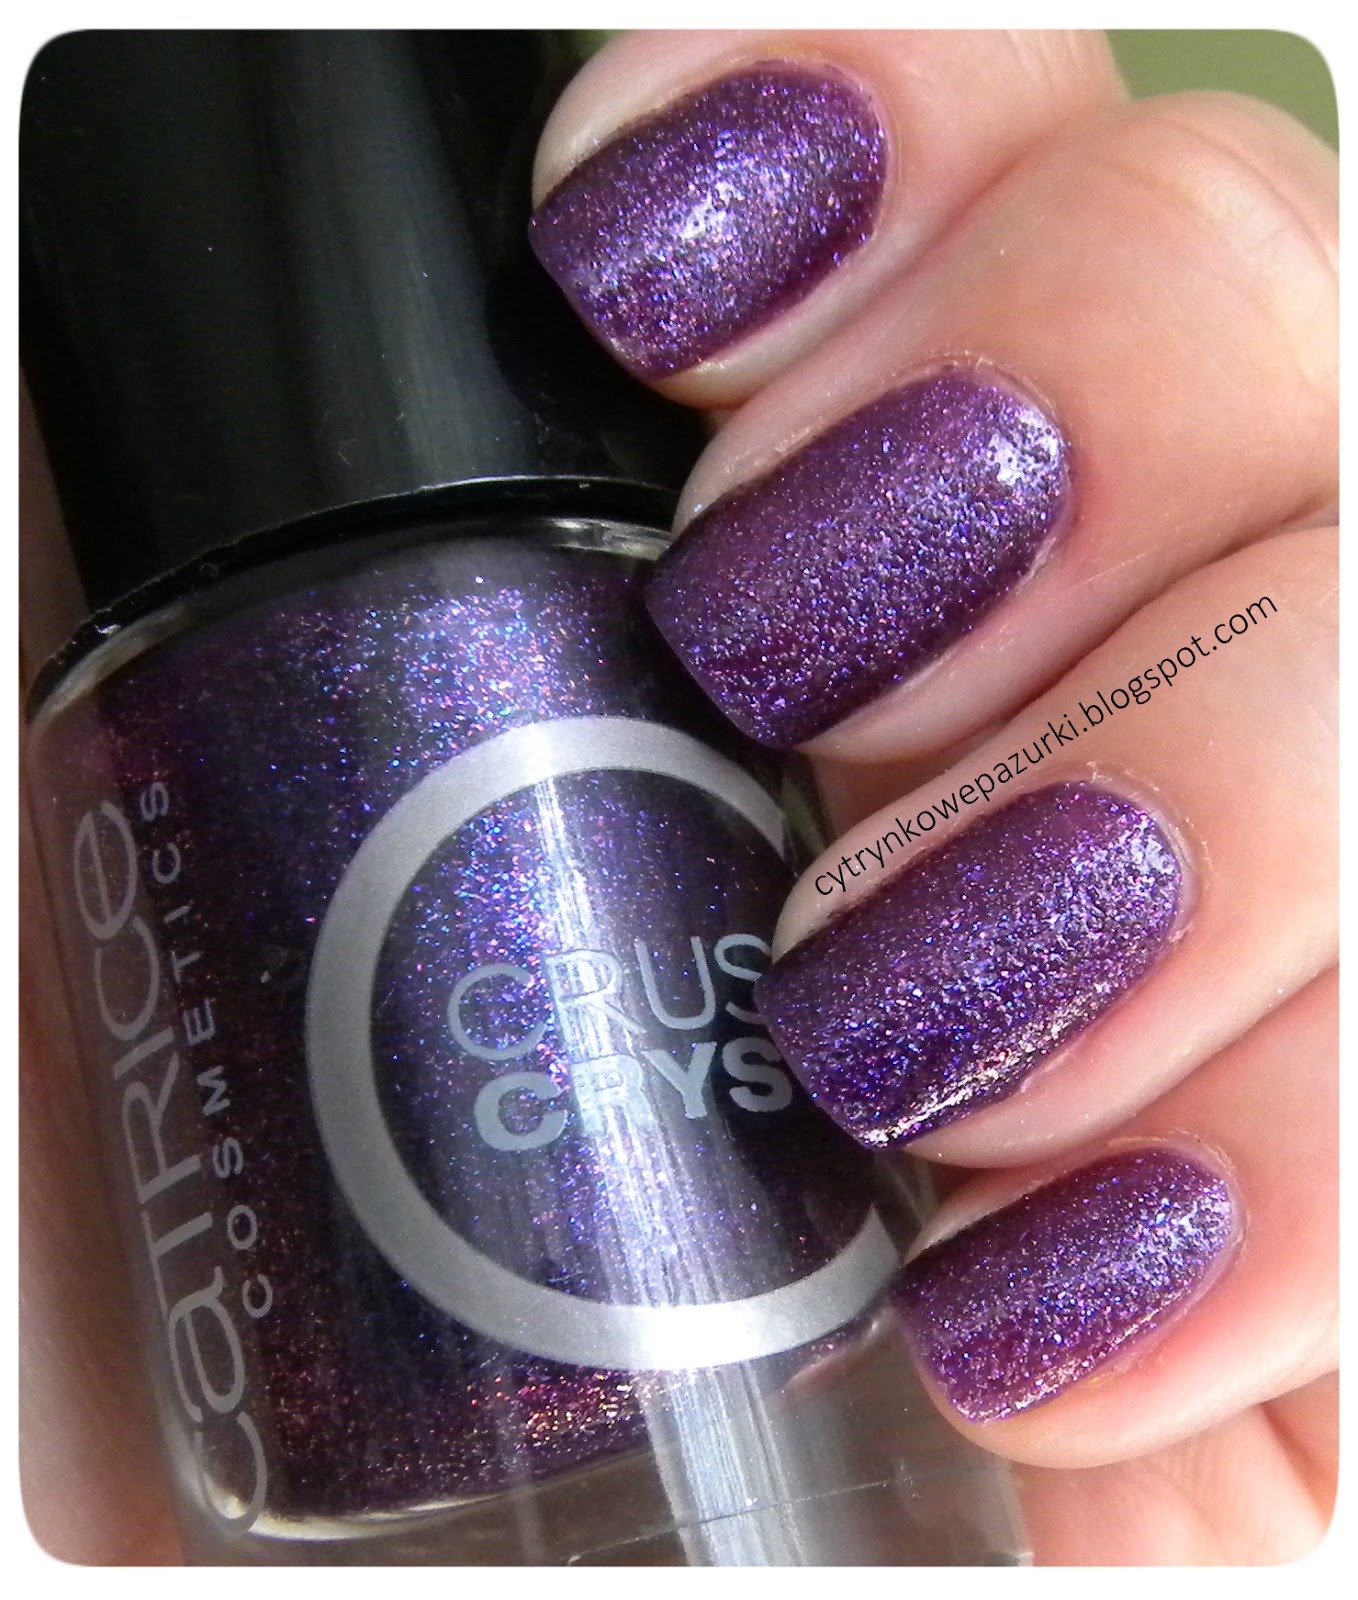 Catrice - Crushed Crystals 02 PLUMdogMillionaire